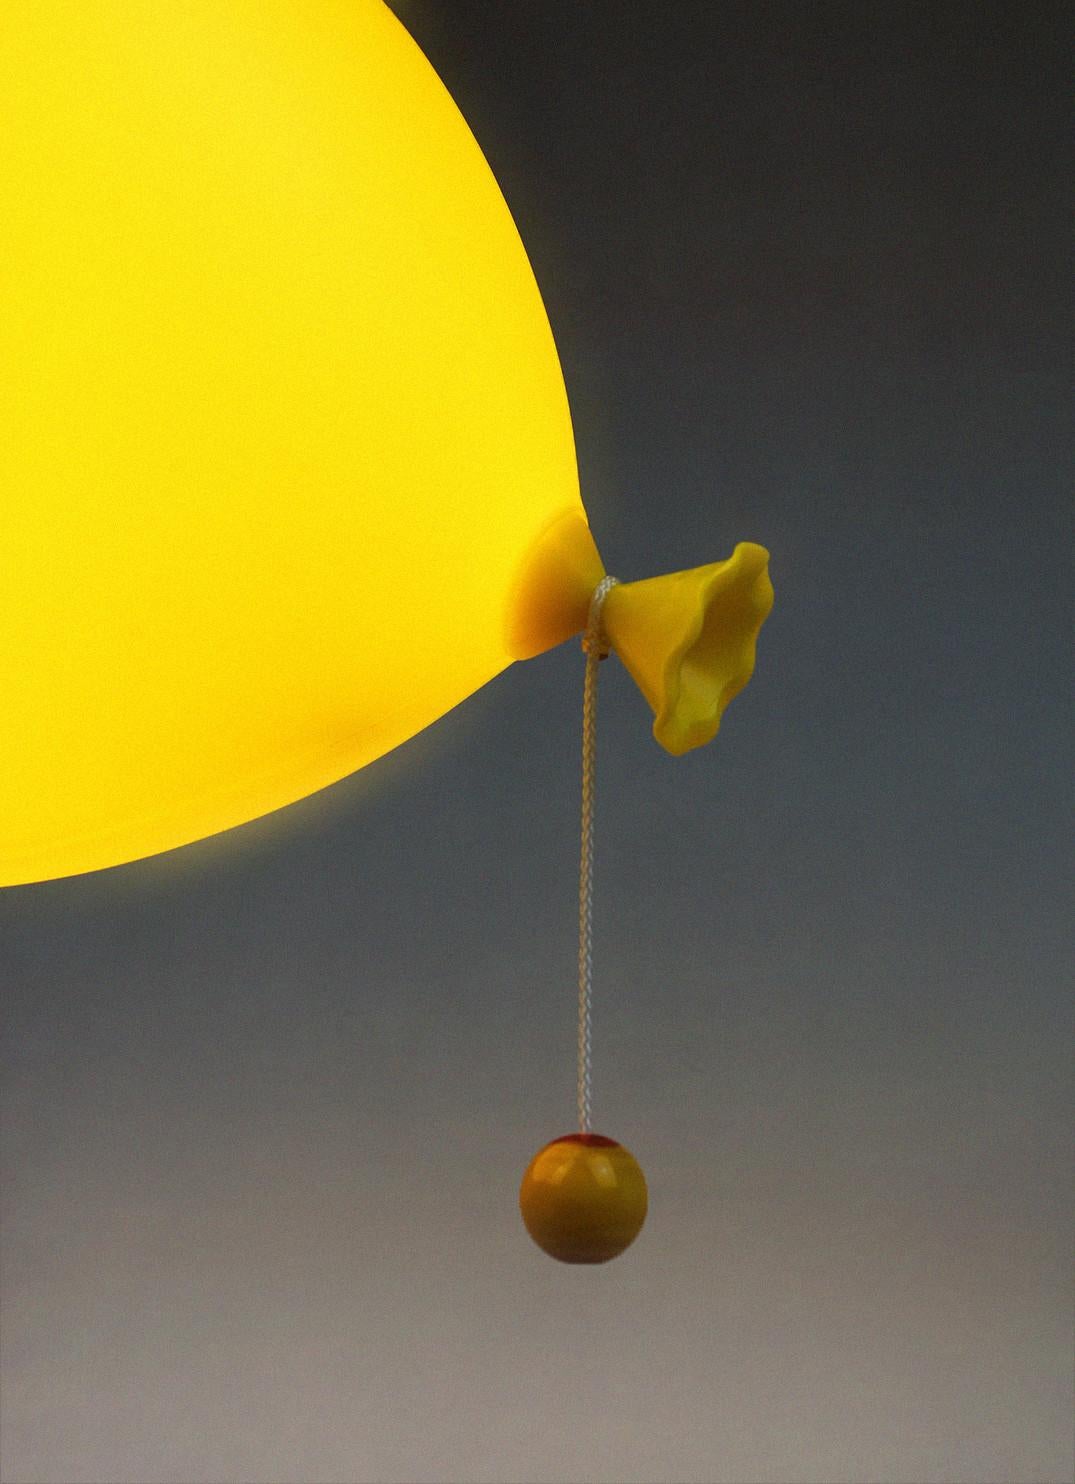 This wall, table or ceiling lamp was designed by Yves Christin for Bilumen in 1984. Because of its balloon shaped design, it is an icon on an international level. It is a yellow polypropylene lamp with black base that immediately stands out in your